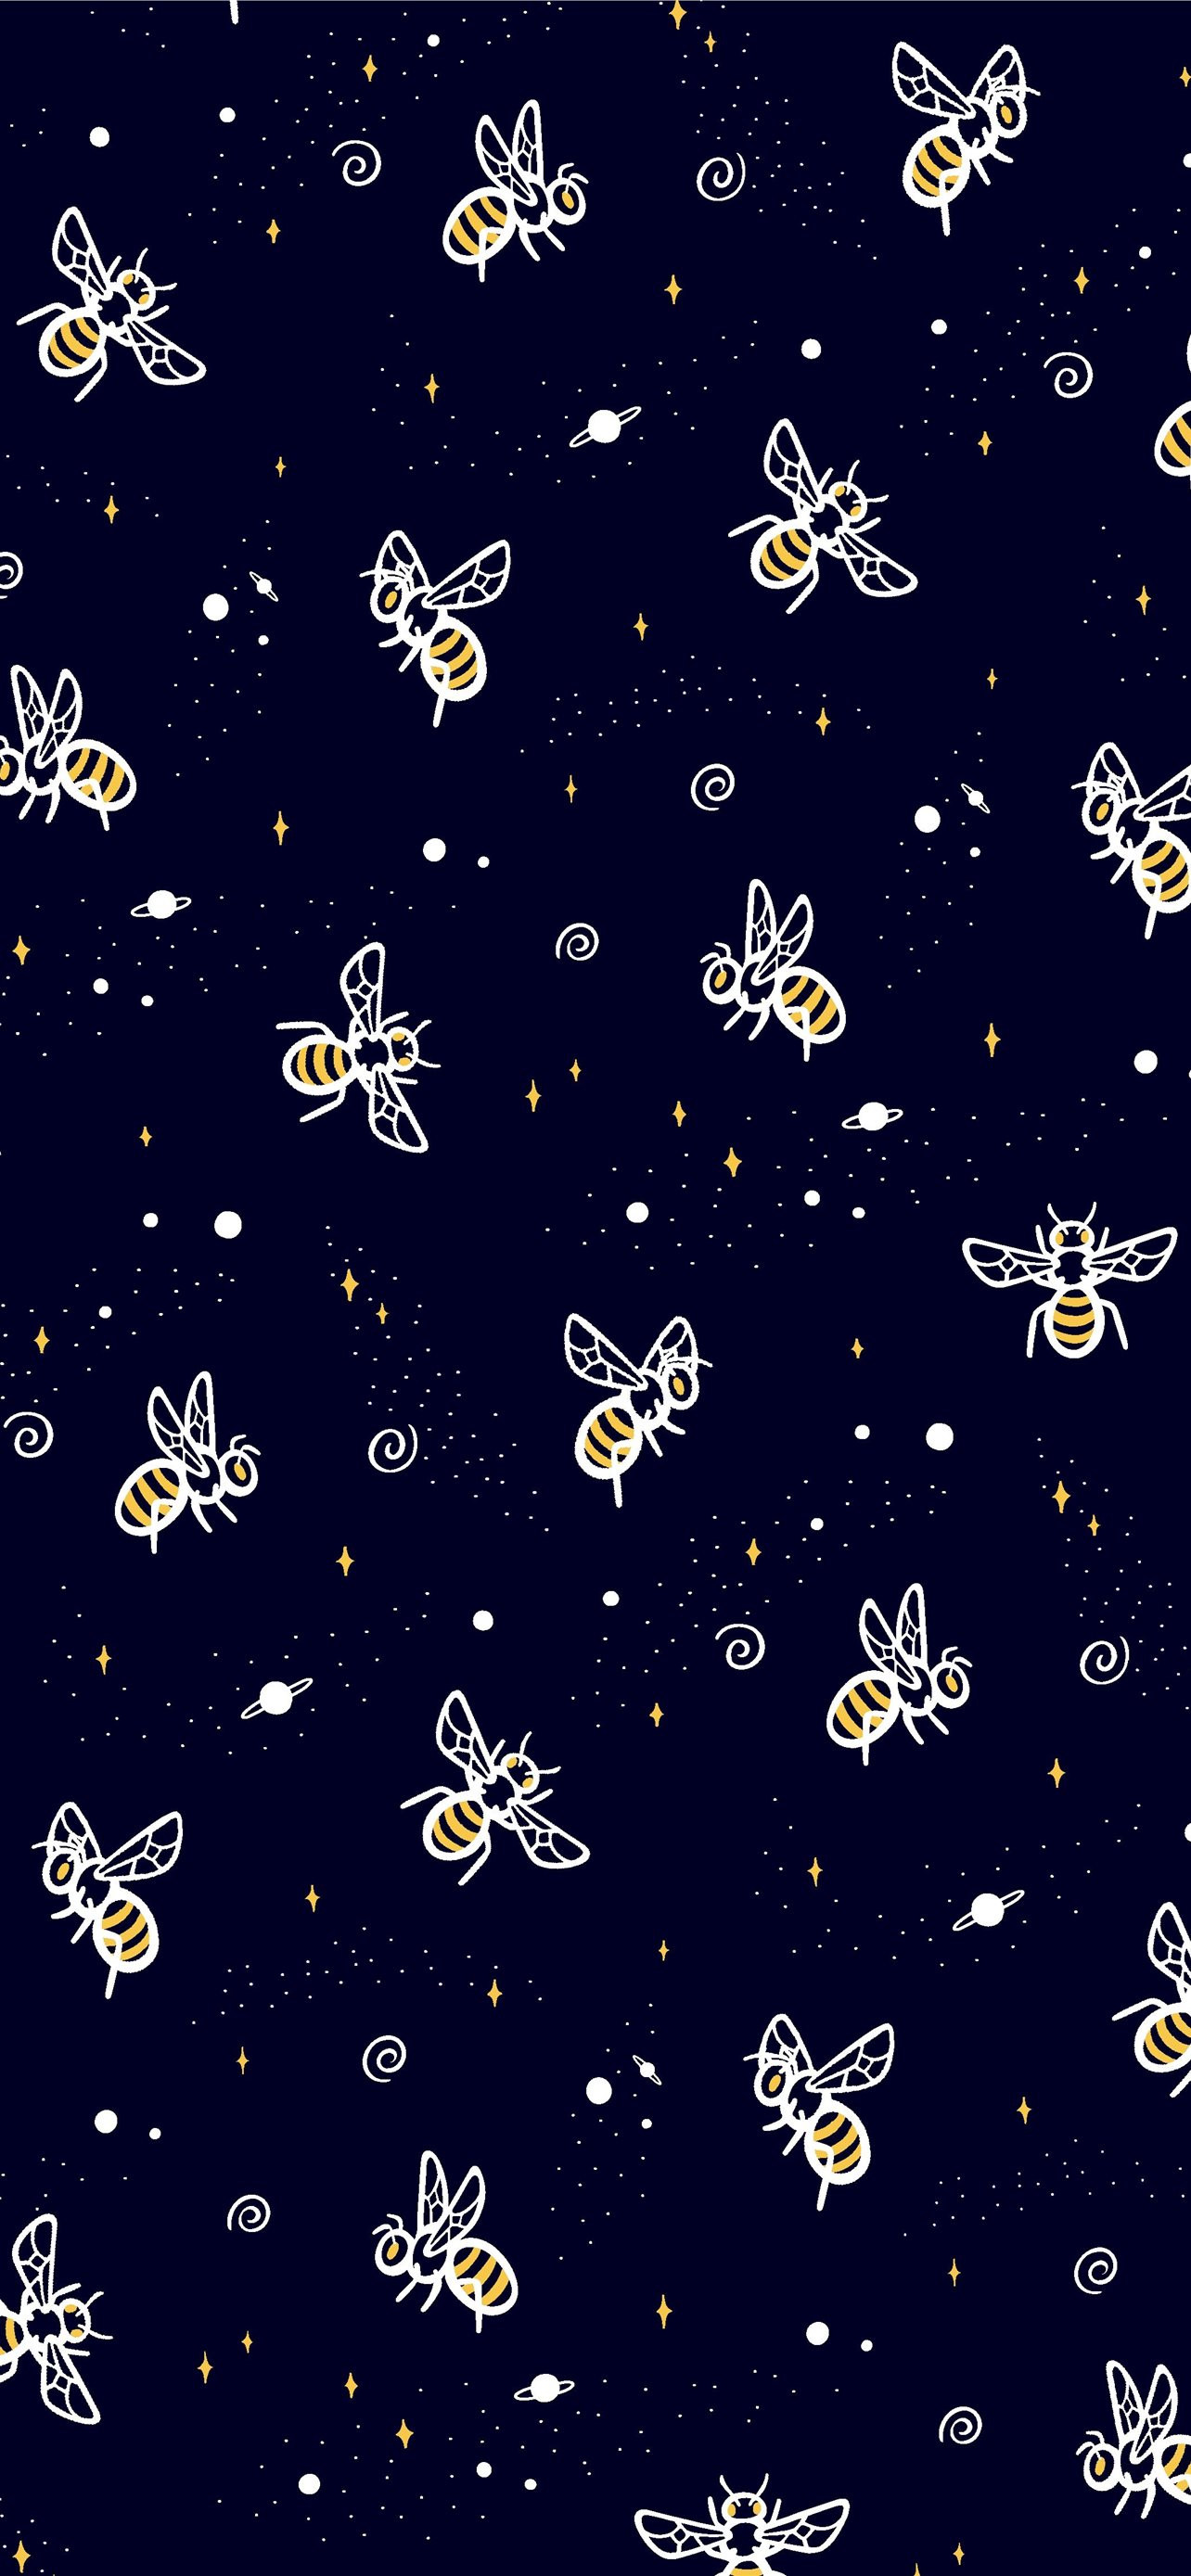 Bees flying around  Cute patterns wallpaper Iphone background wallpaper  Cute wallpapers